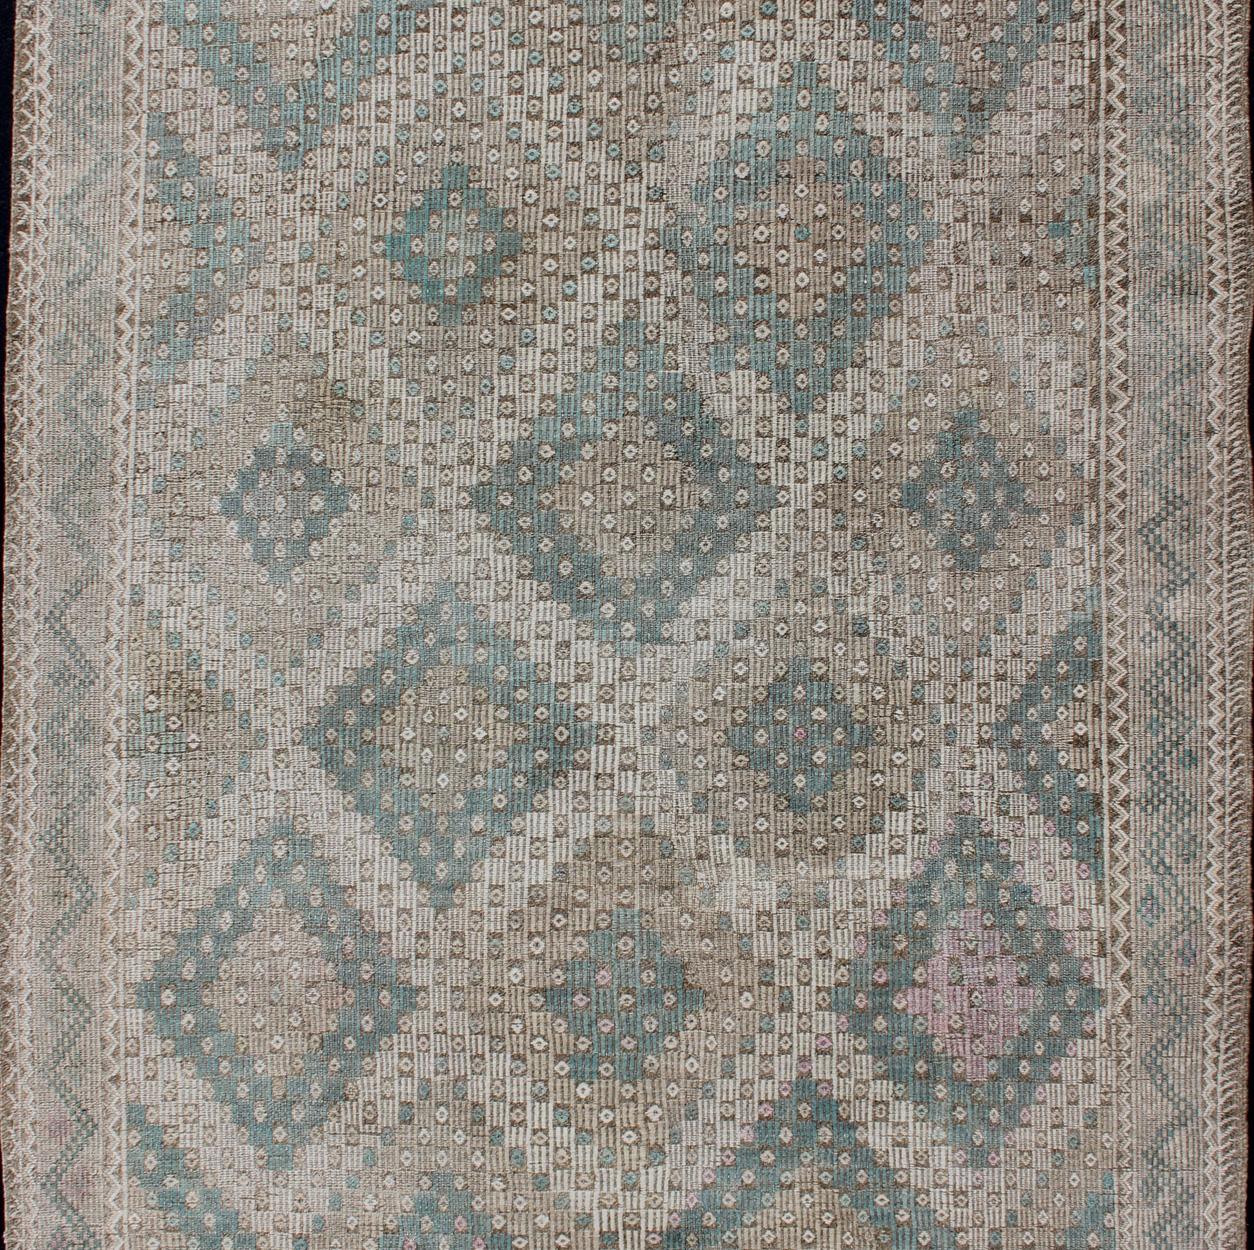 Diamond Design Vintage Turkish Embroidered Kilim in Light Teal blue, Tan, Brown In Excellent Condition For Sale In Atlanta, GA